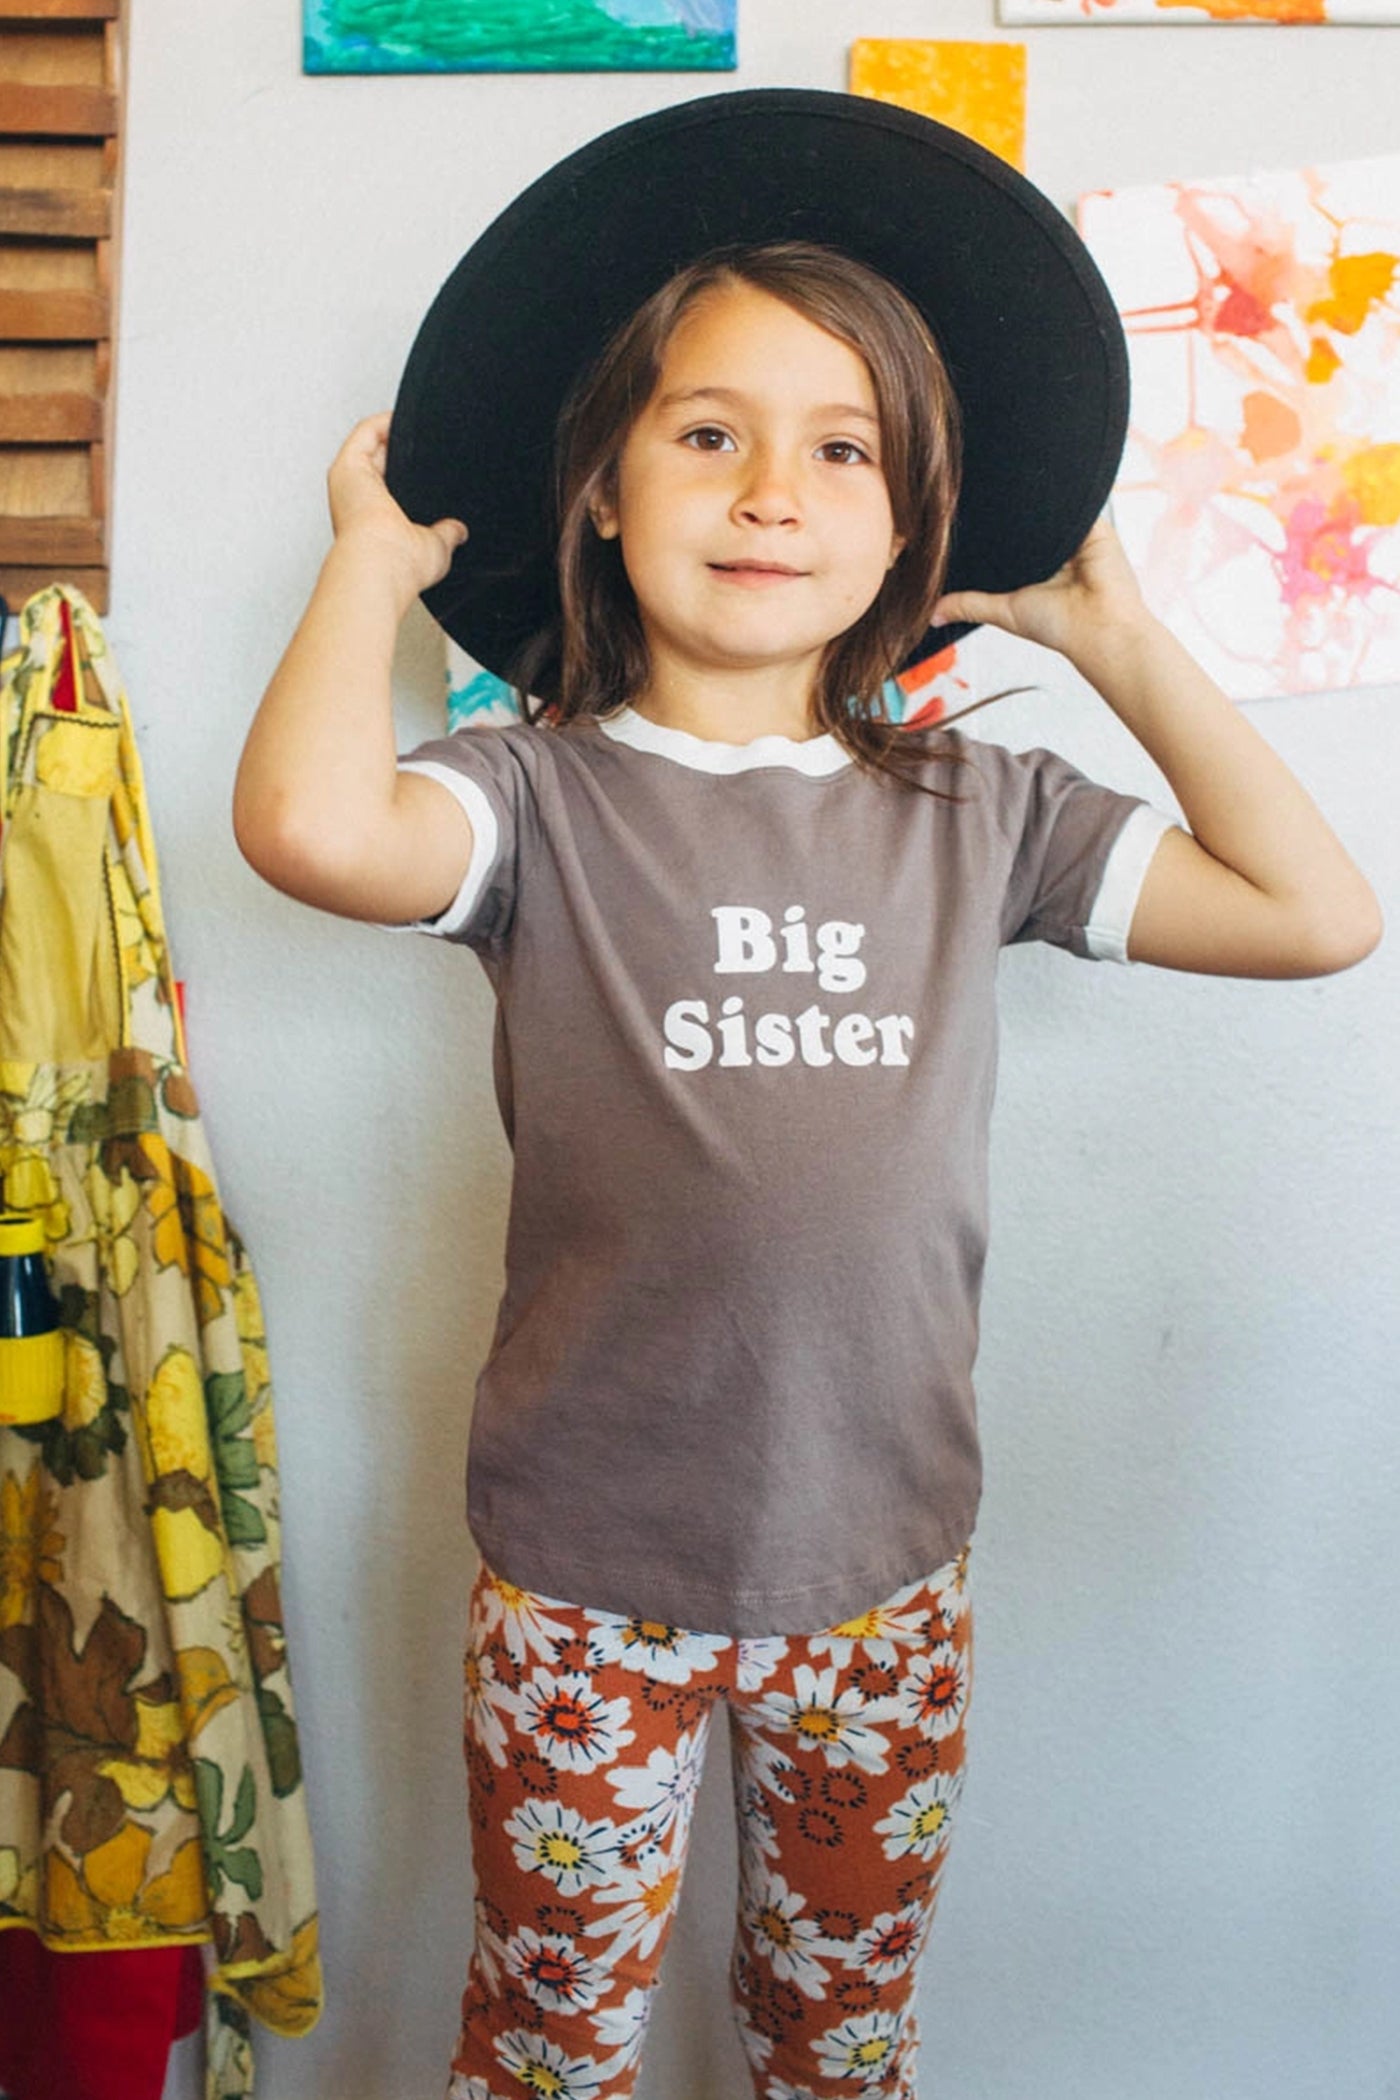 Big Sister Ringer Kids Tee by The Bee & The Fox